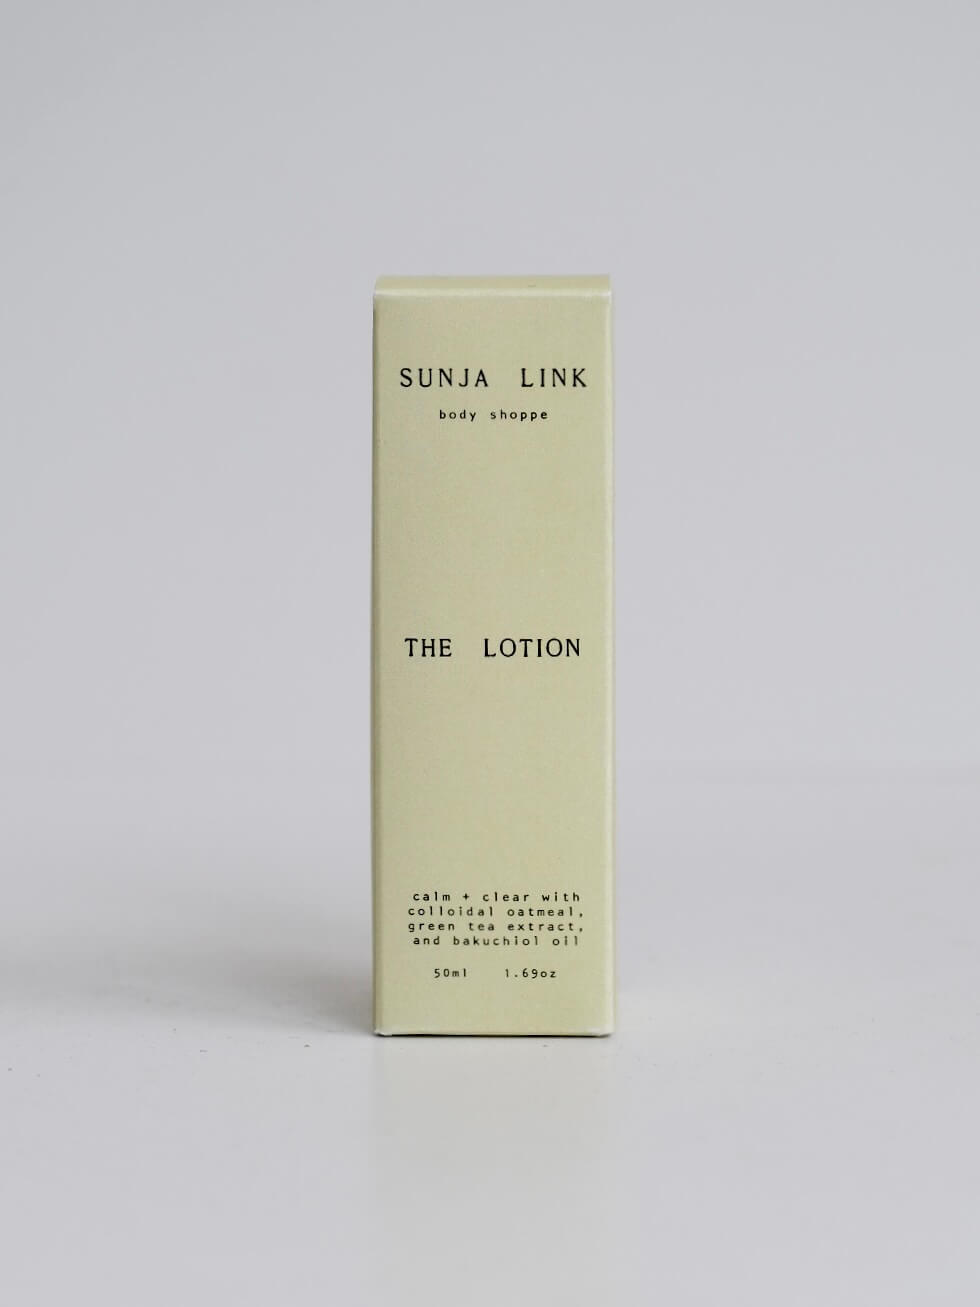 The Lotion by Sunja Link